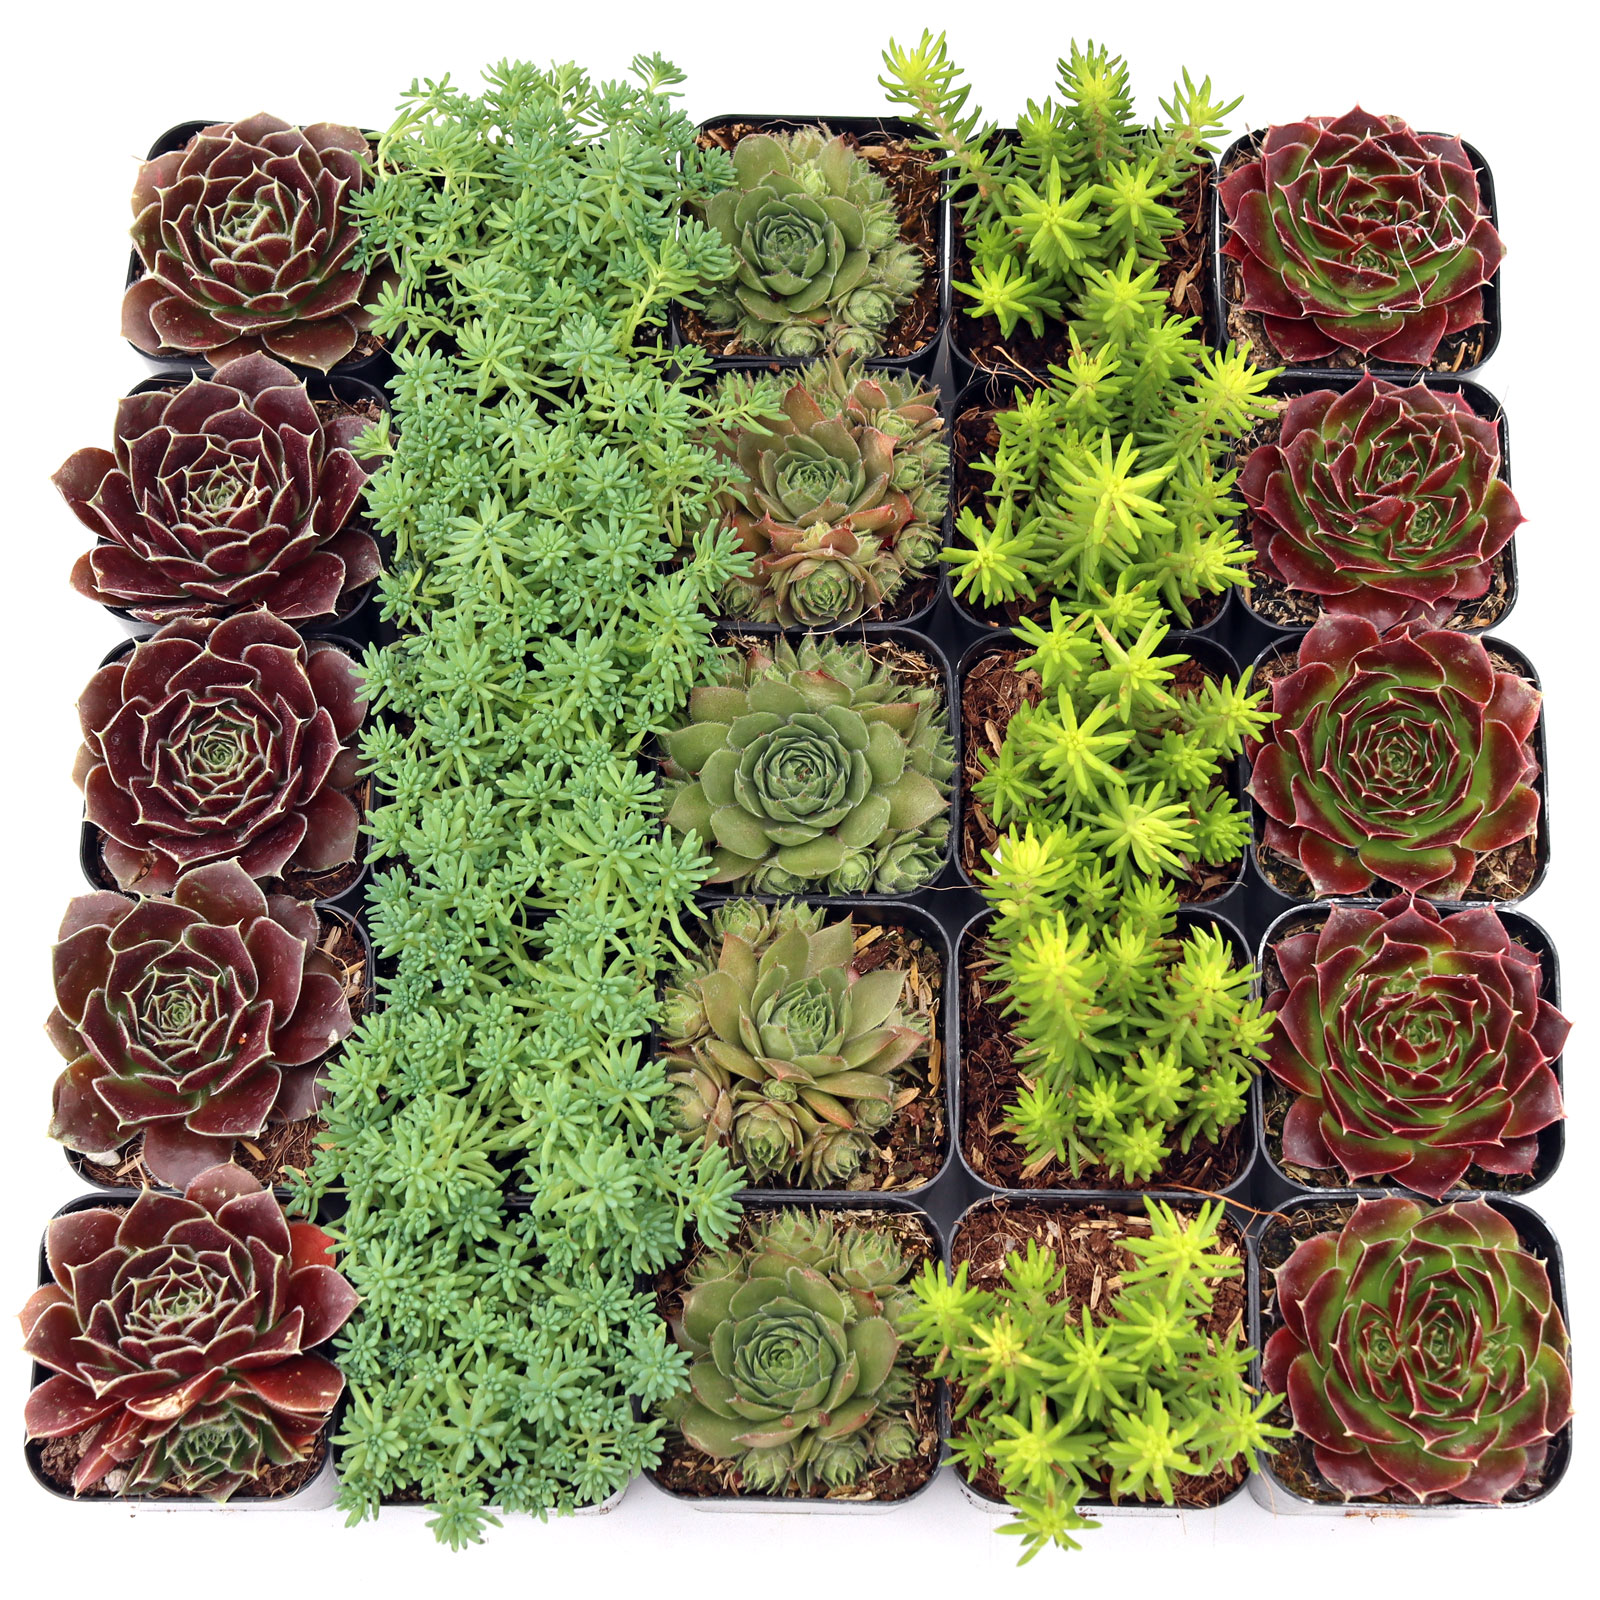 If I order 2 trays, will both trays have the same succulents?